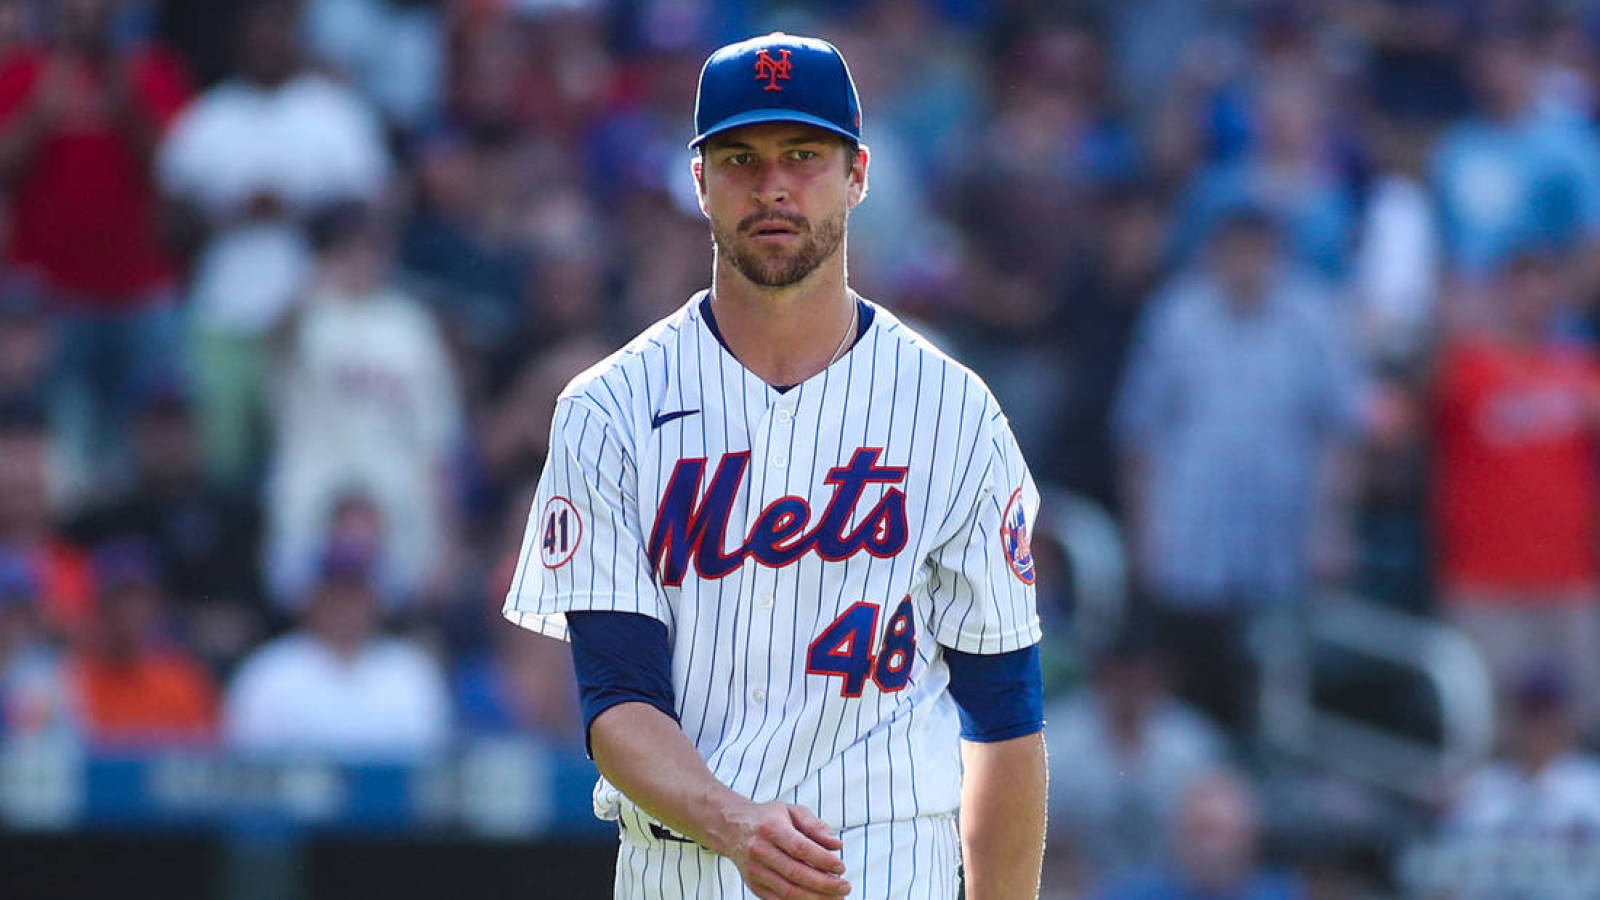 Rays interest in Jacob deGrom real but “pessimistic” - DRaysBay